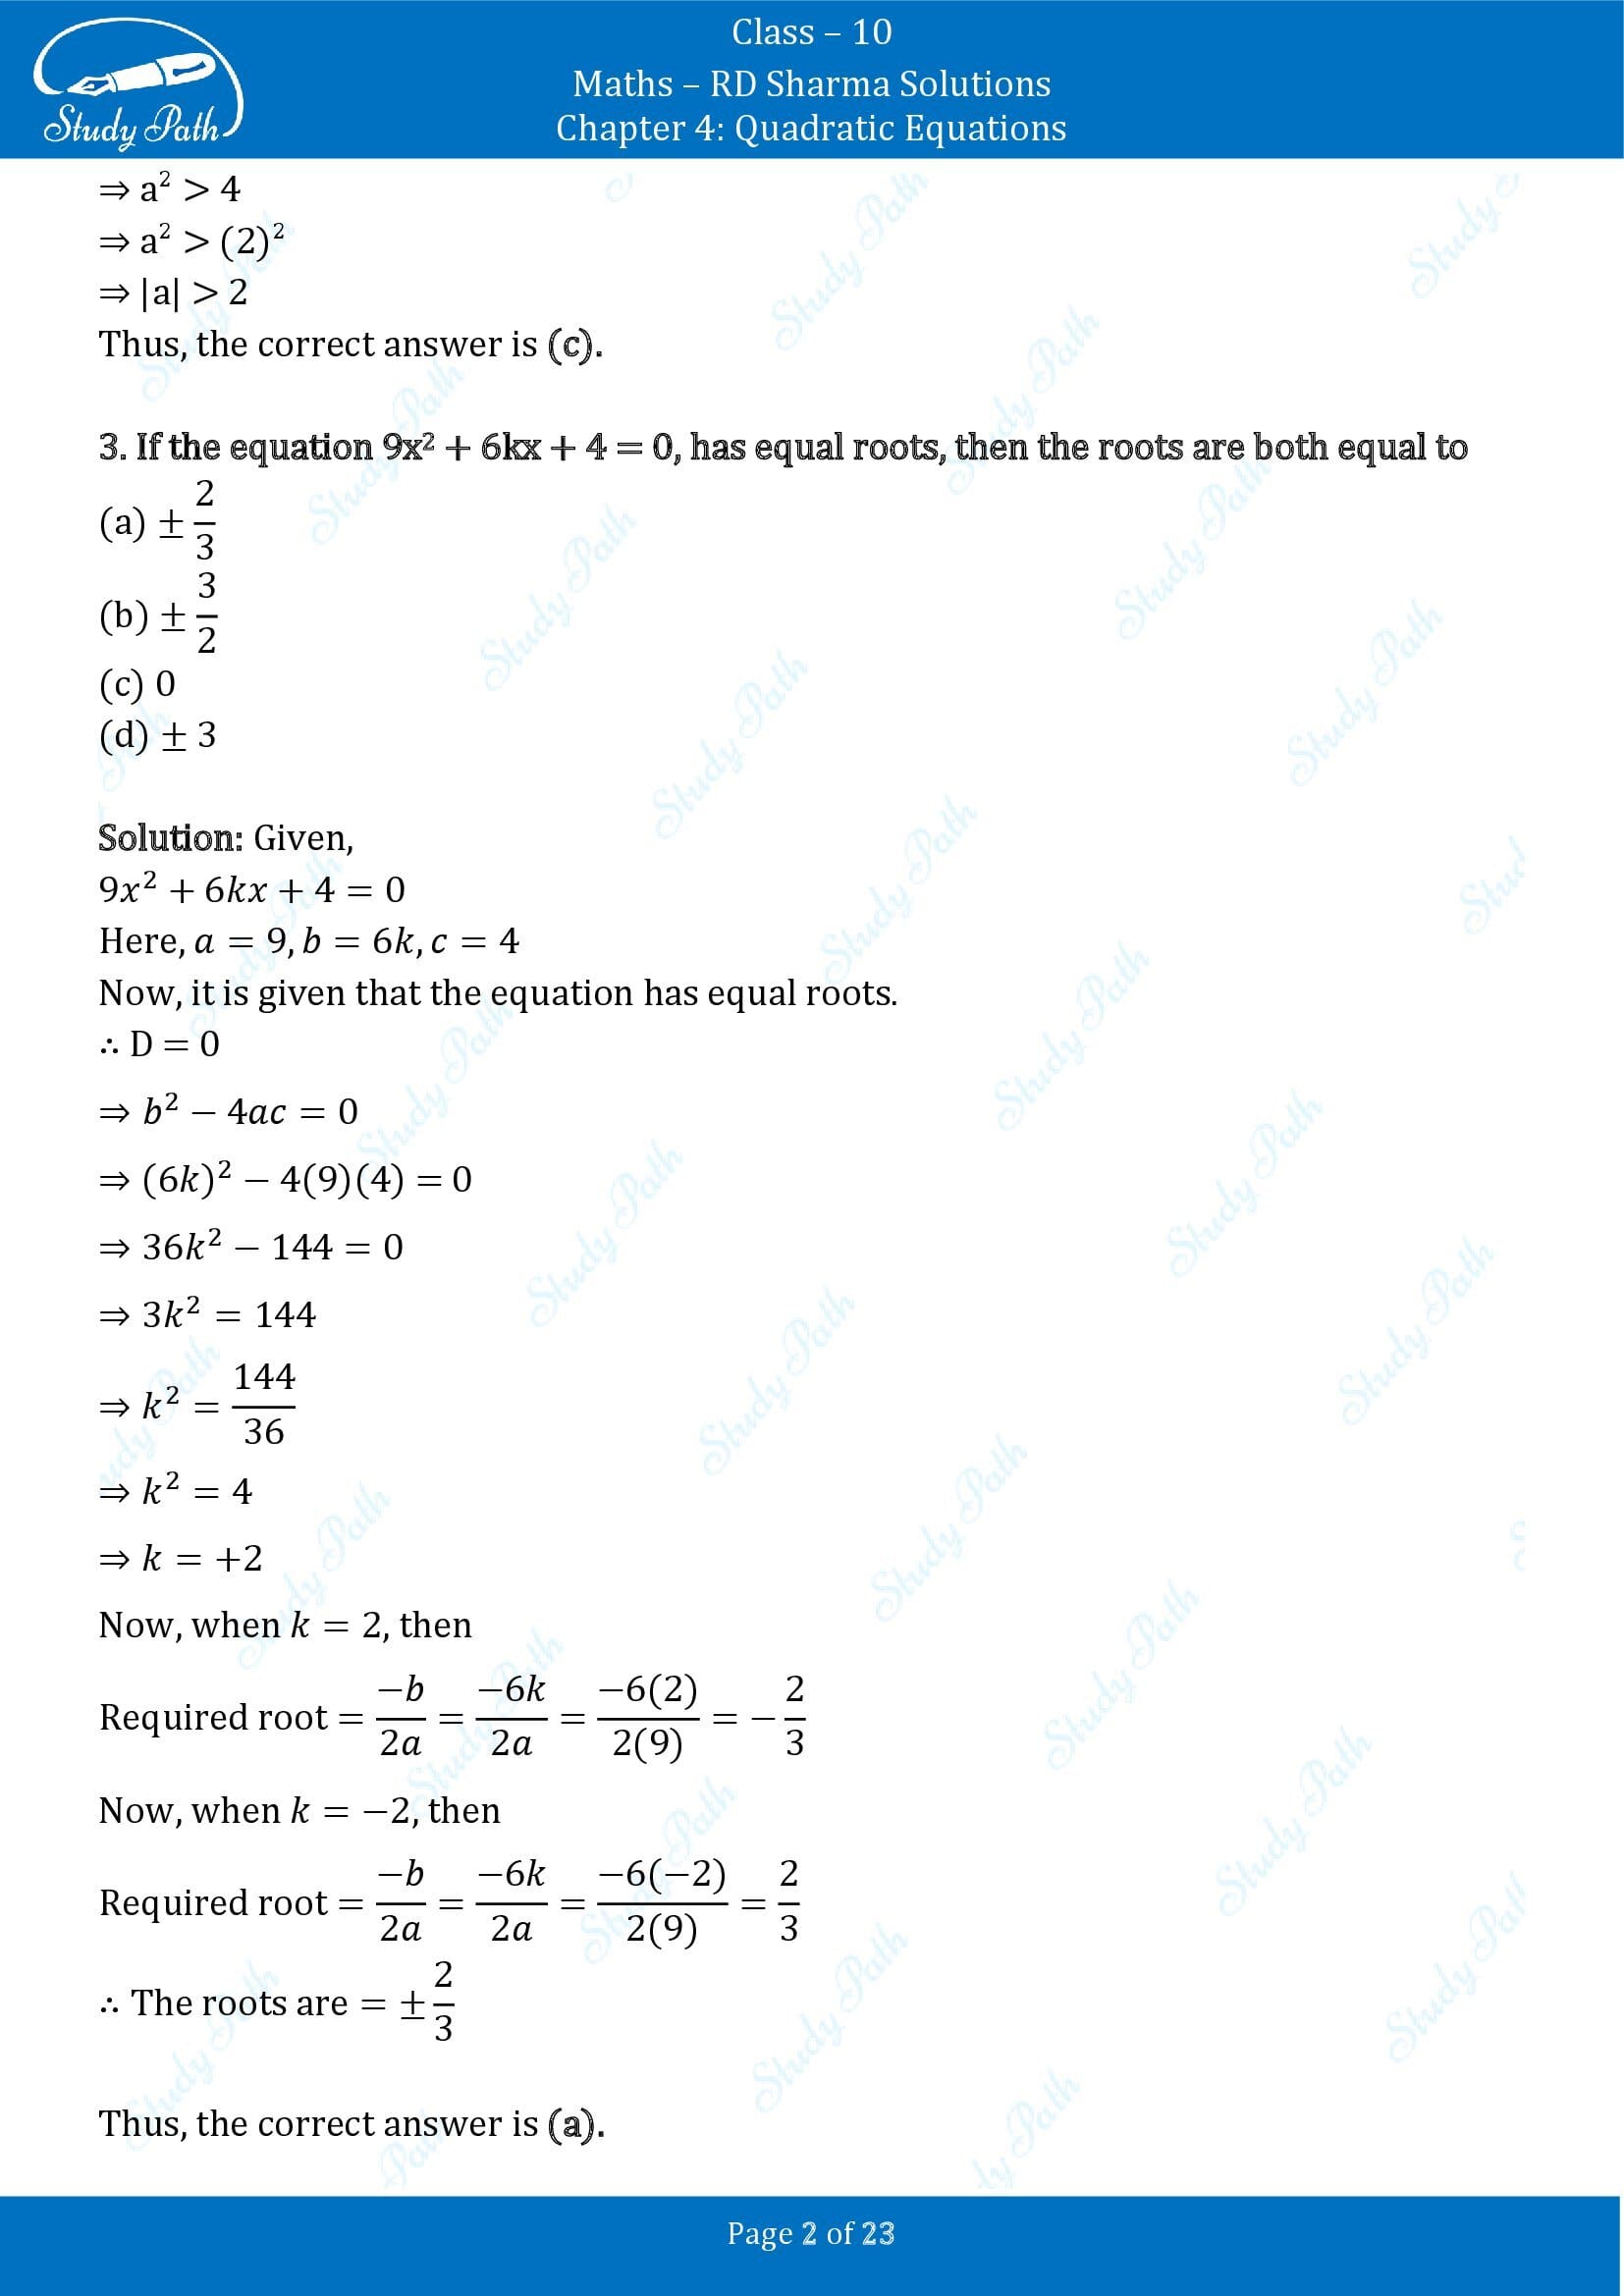 RD Sharma Solutions Class 10 Chapter 4 Quadratic Equations Multiple Choice Questions MCQs 00002